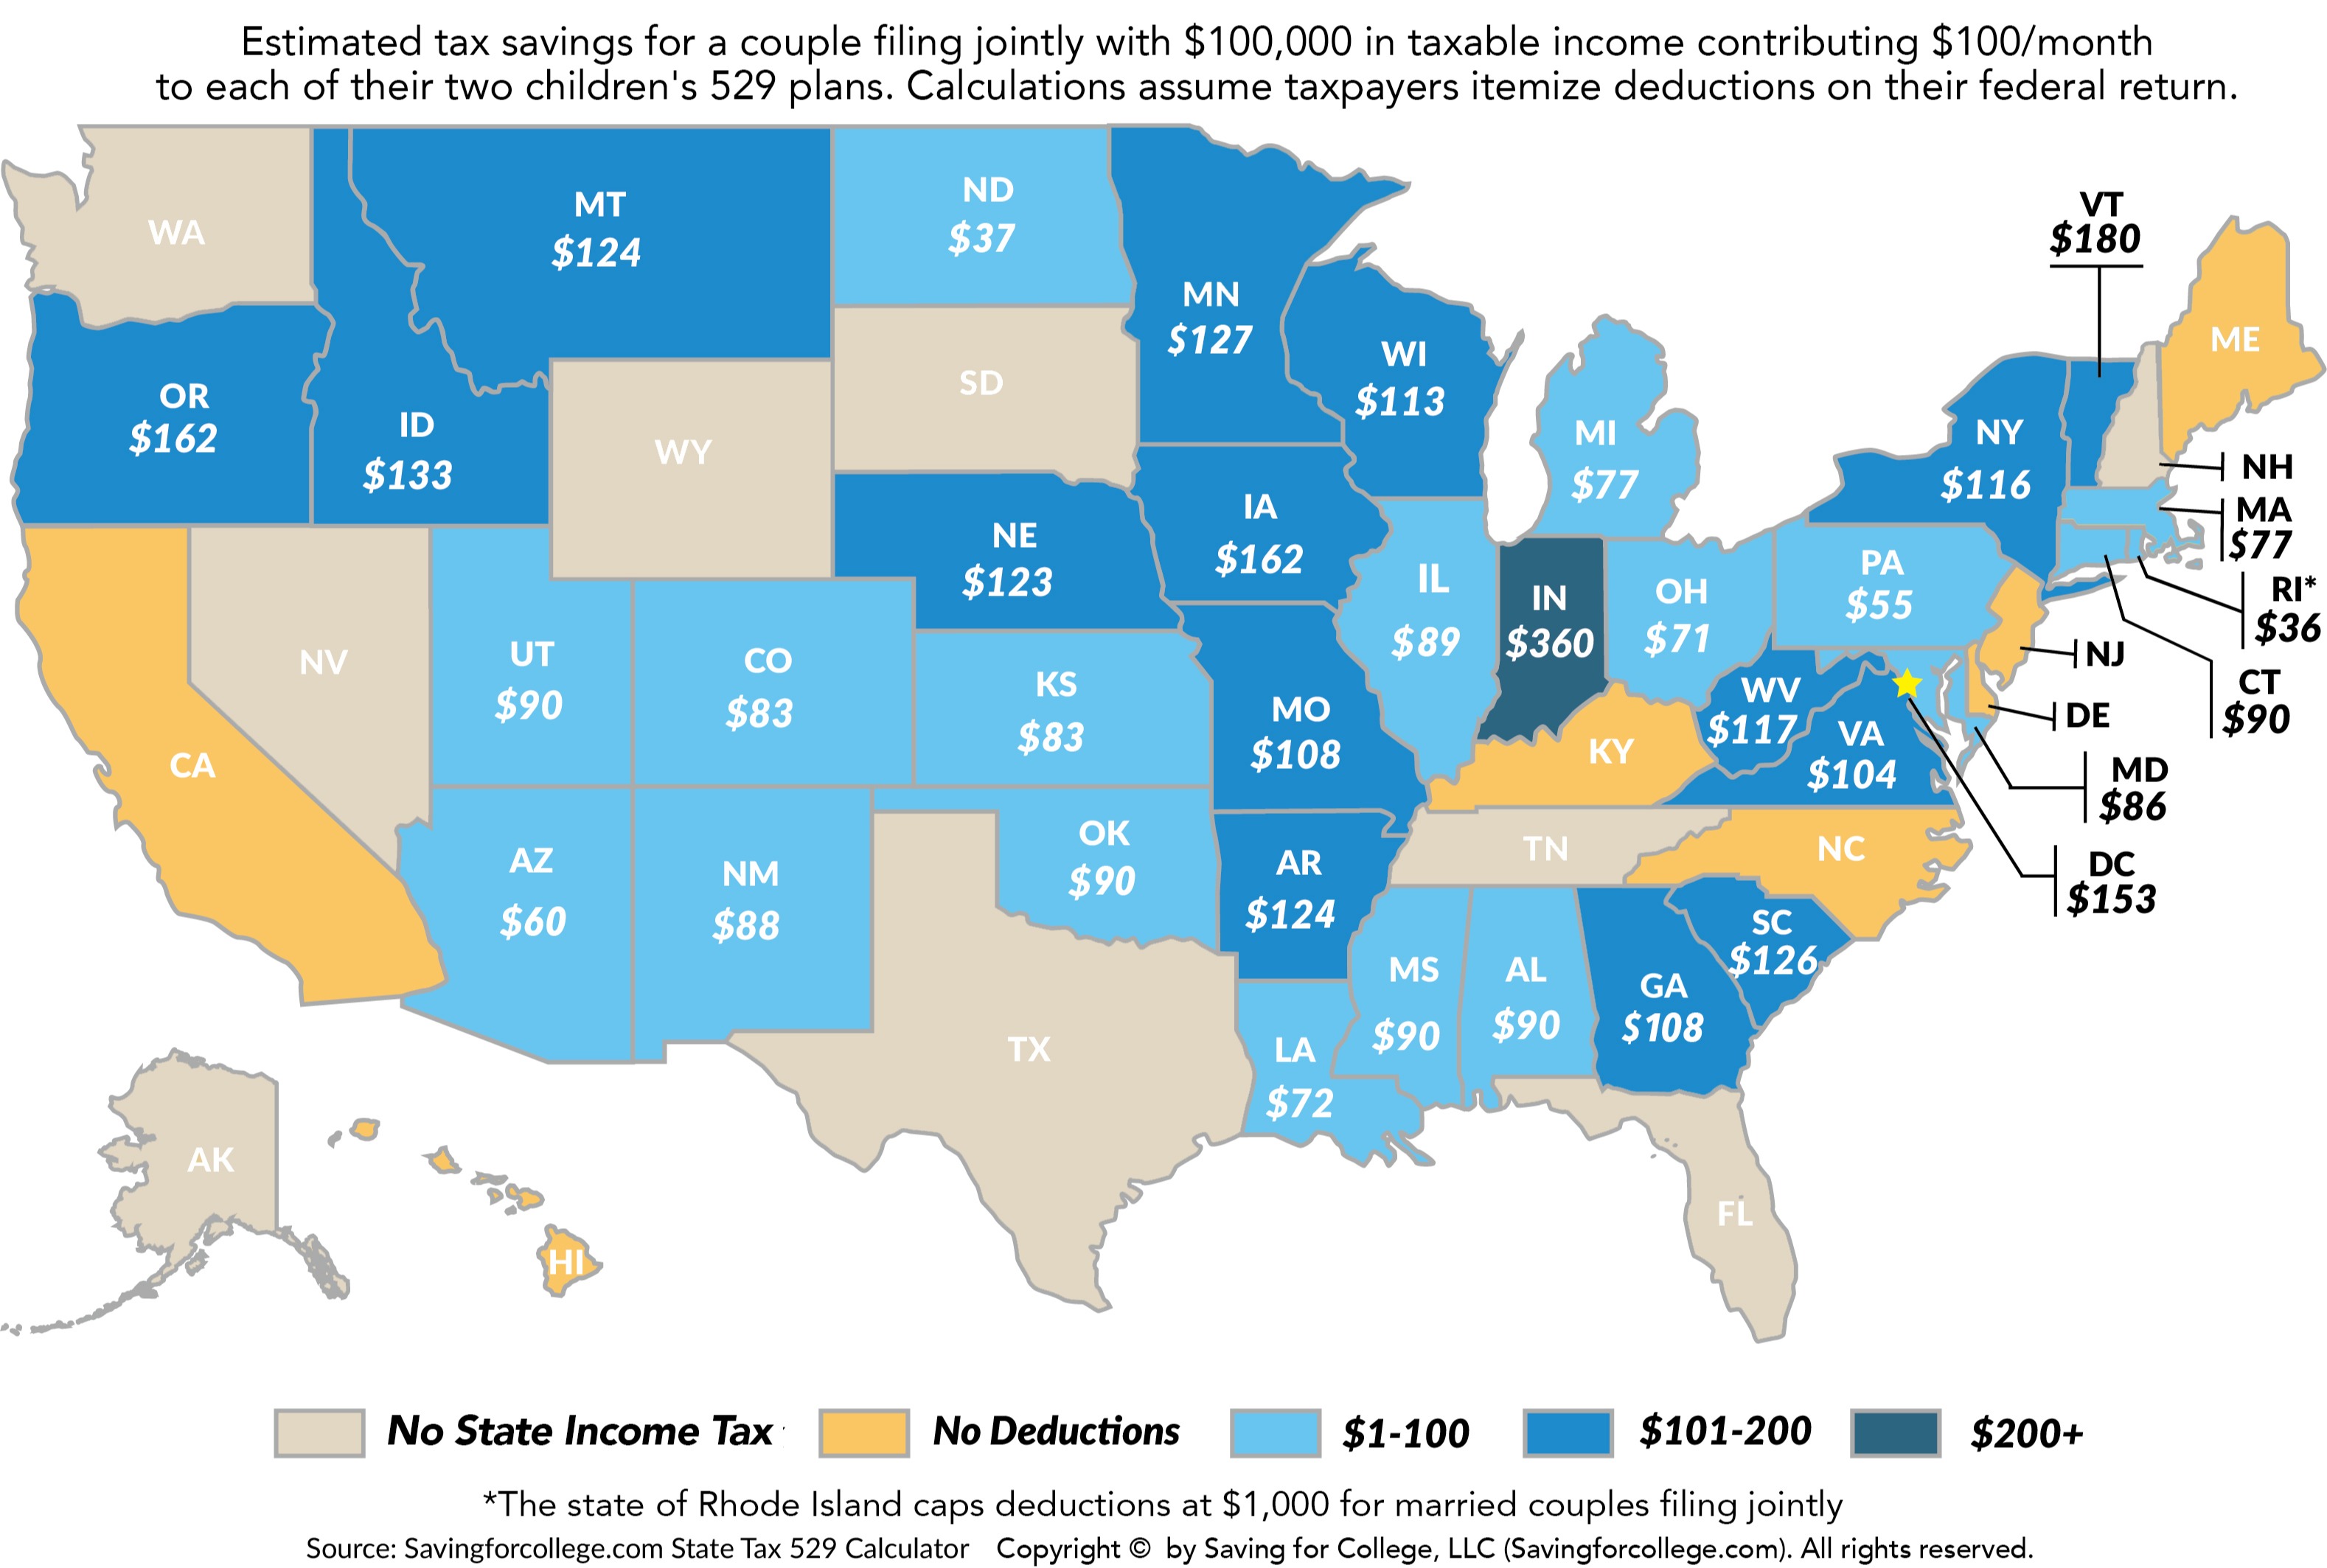 How Much Is Your State's 529 Plan Tax Deduction Really Worth?